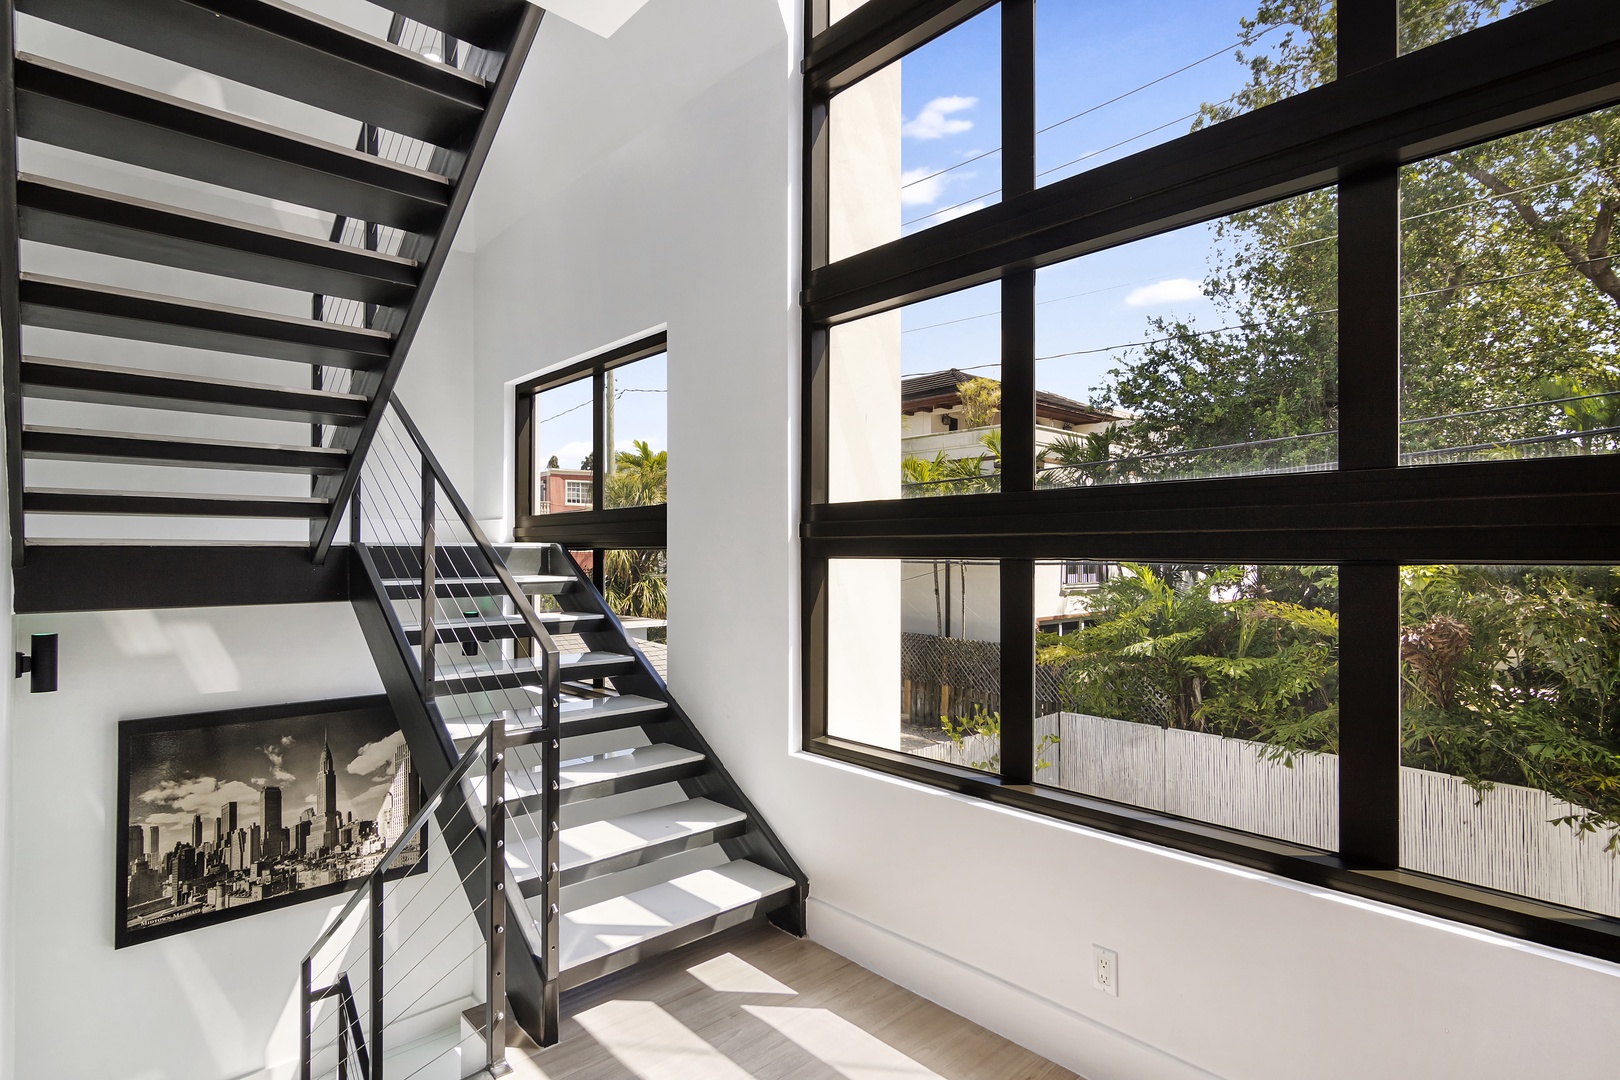 Natural light fills the Instagrammable staircase, leading to the 3rd floor